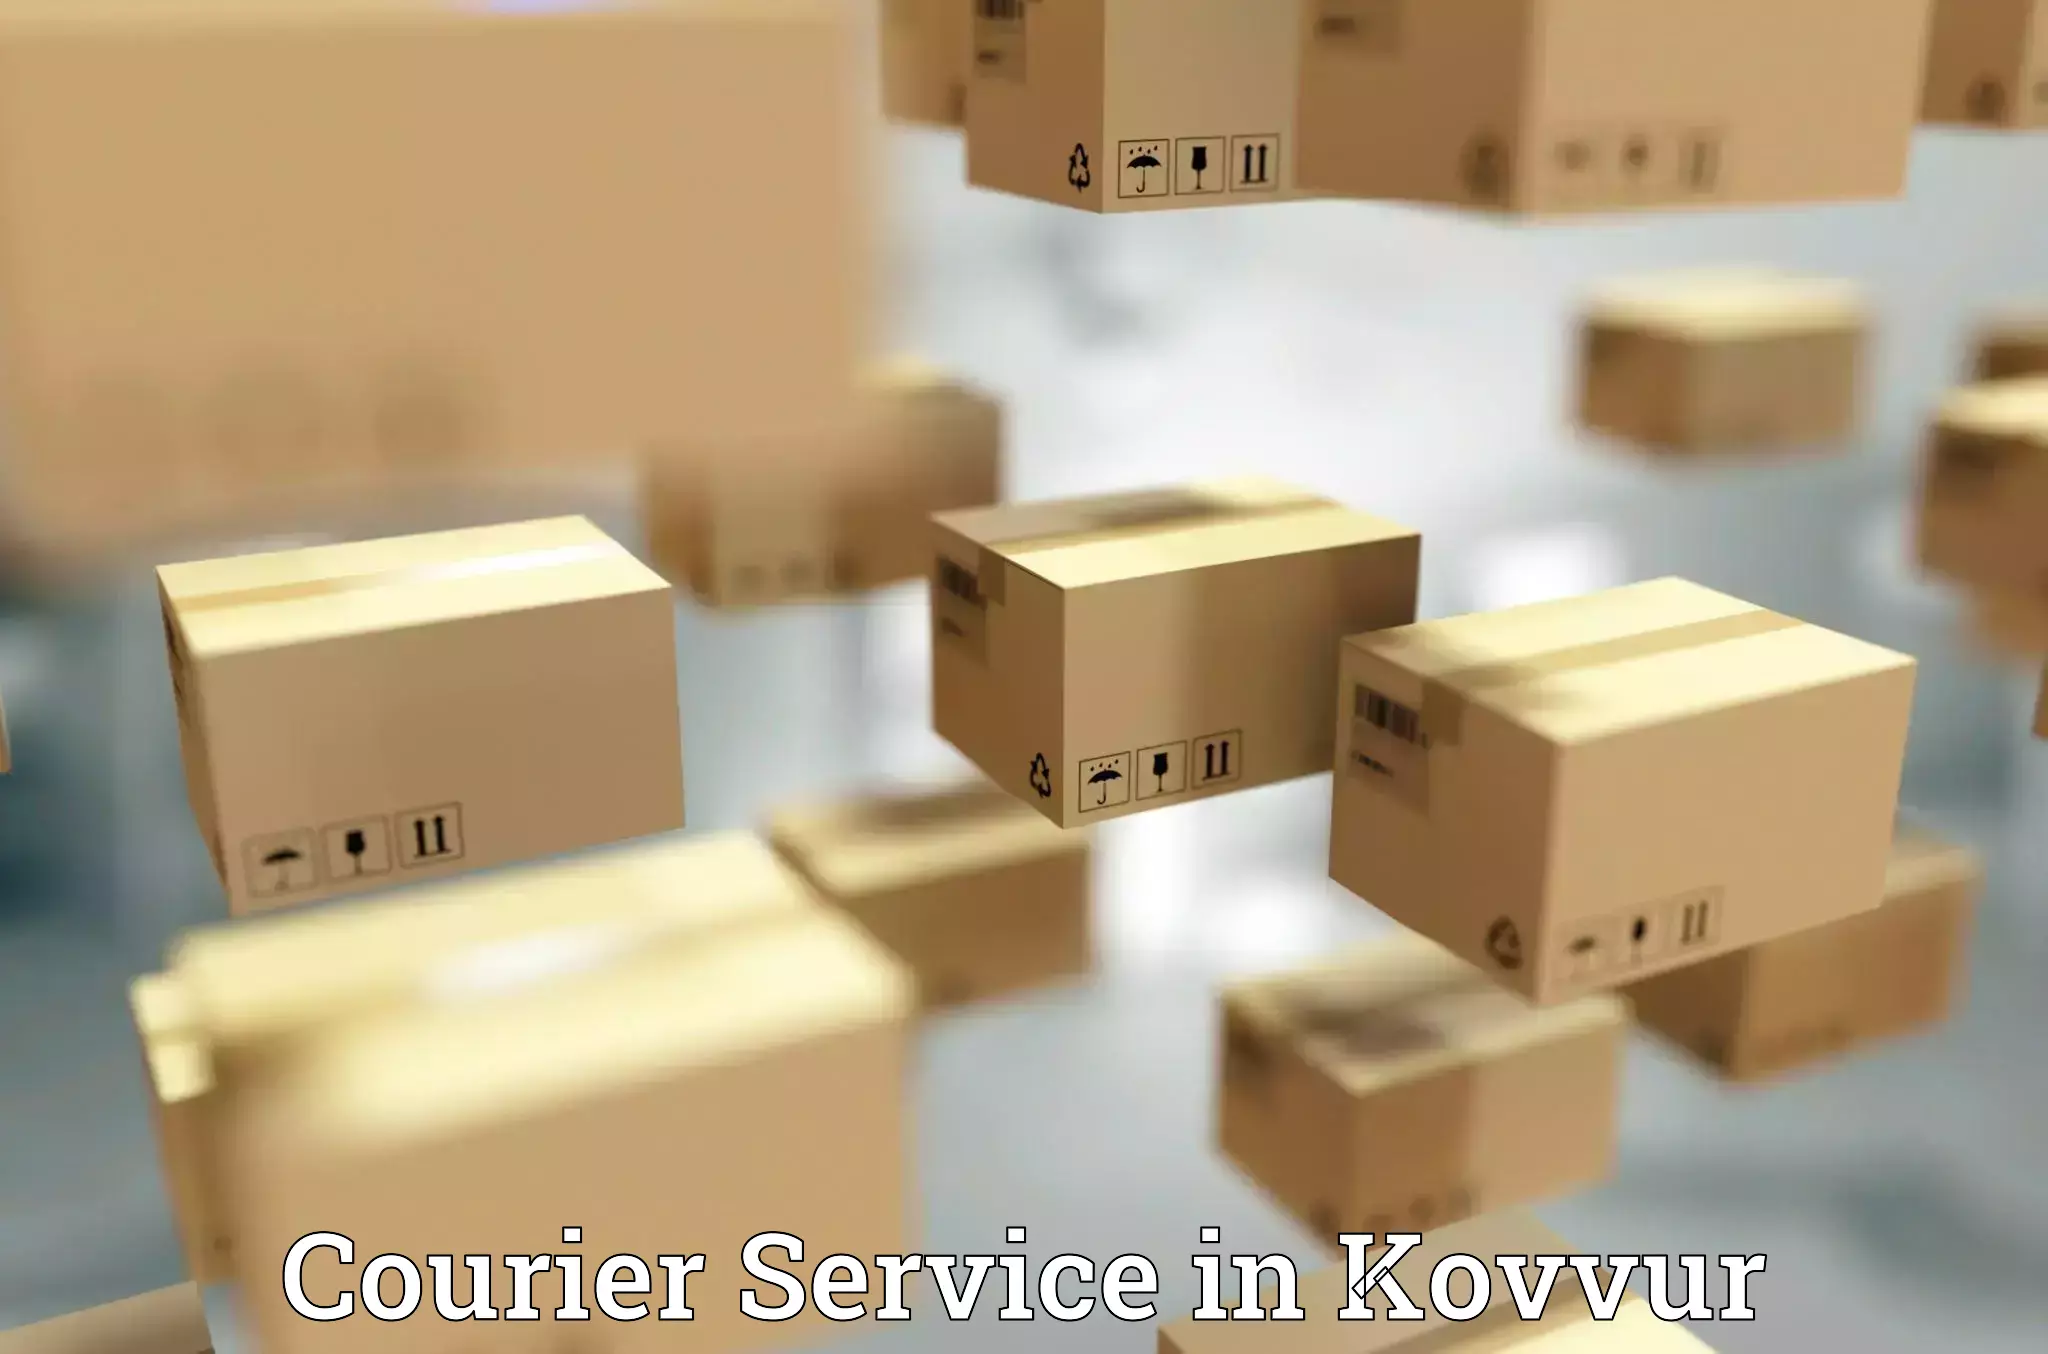 Automated shipping in Kovvur